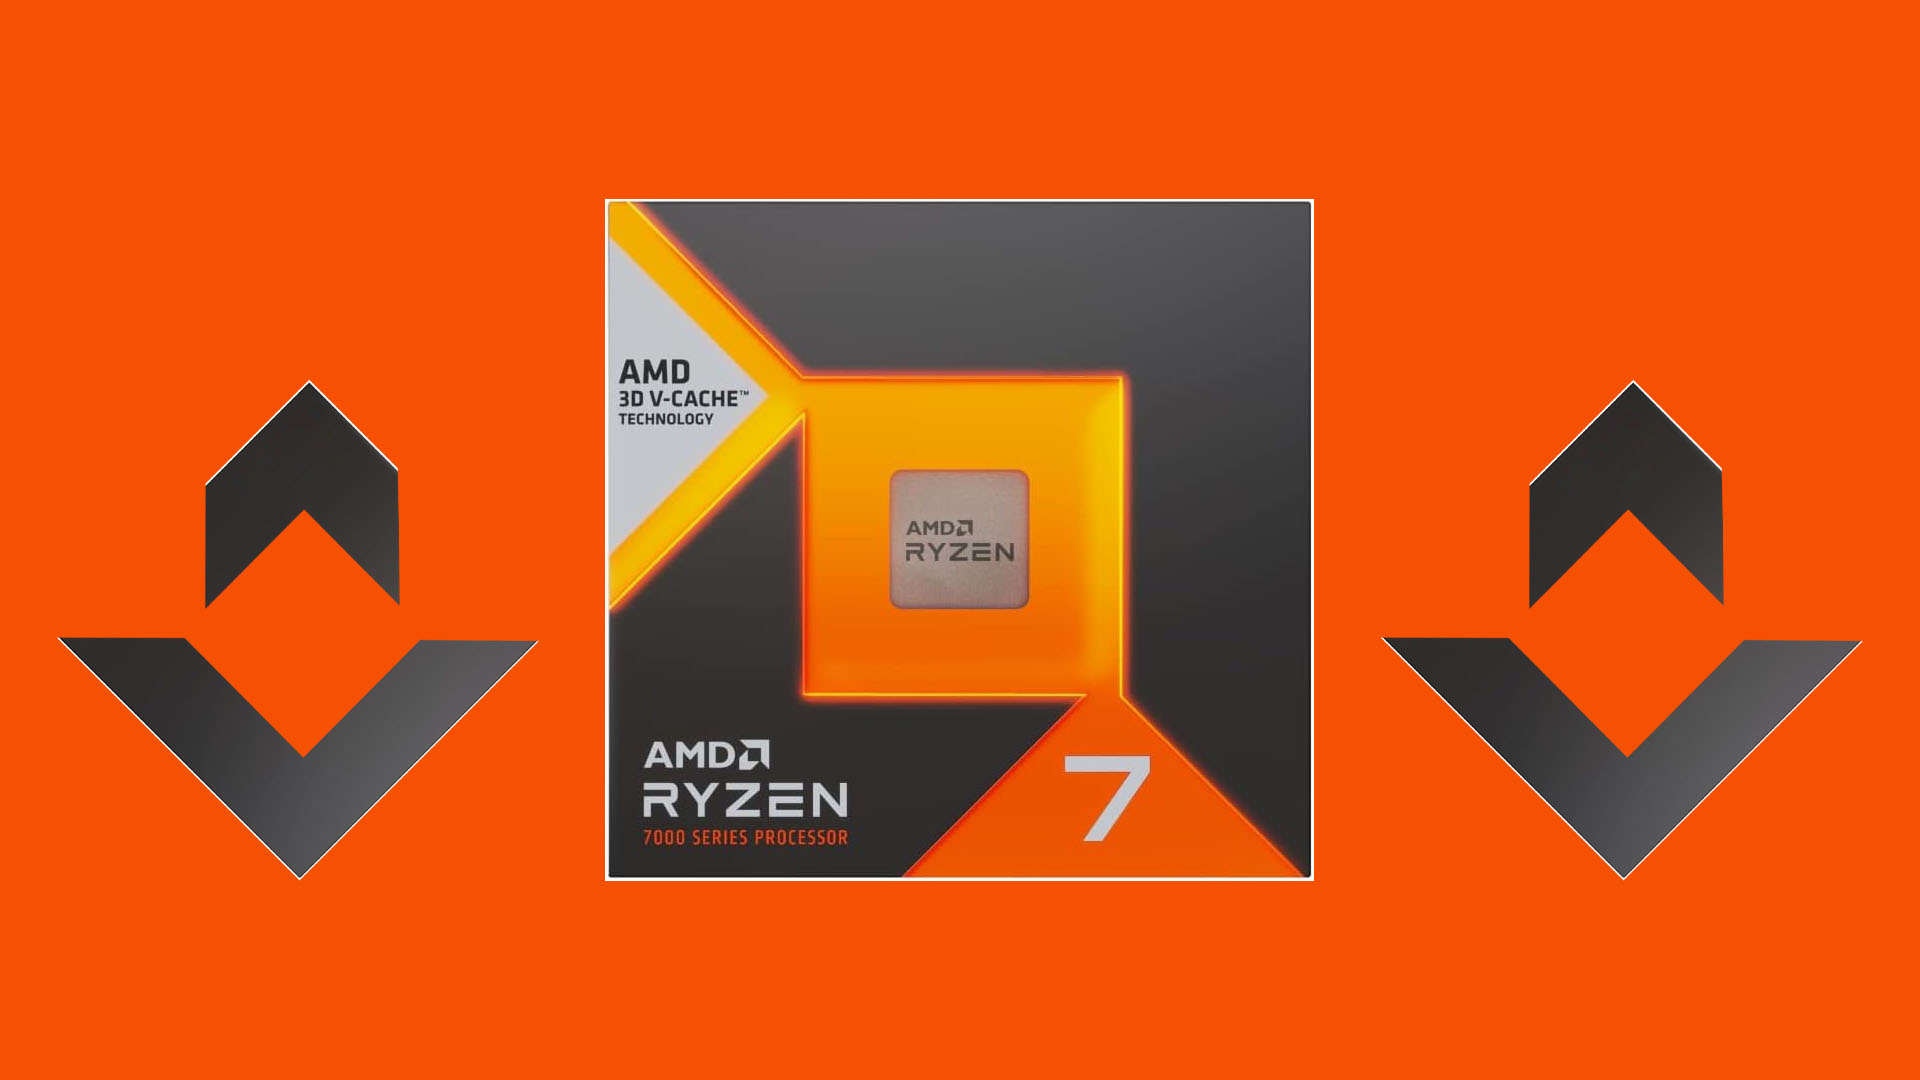 Save a massive 23% on an AMD Ryzen 7800X3D in this CPU deal